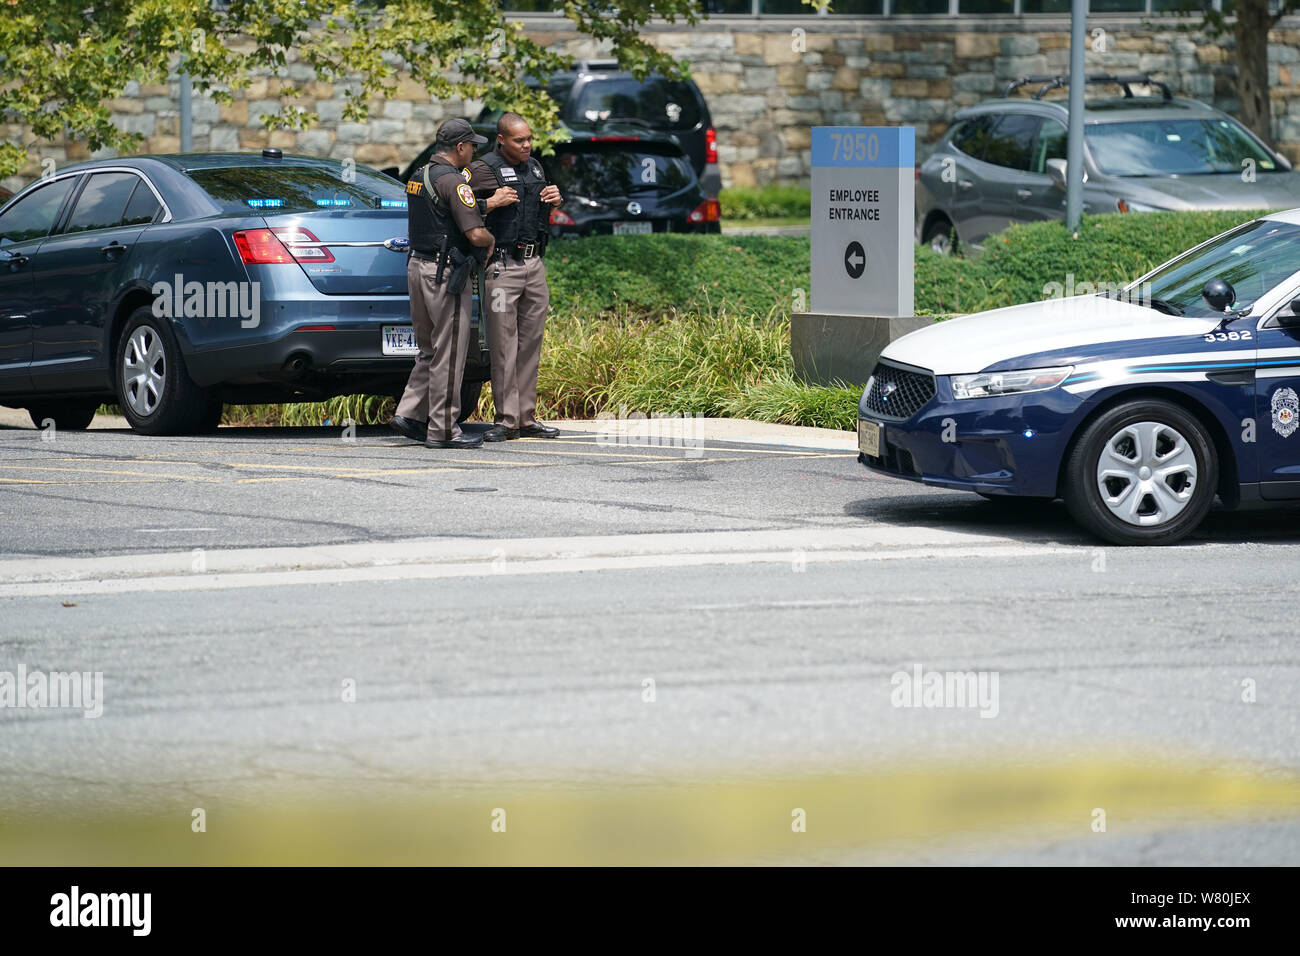 Mclean, USA. 7th Aug, 2019. Police officers are seen at USA Today's headquarters in McLean, Virginia, the United States, on Aug. 7, 2019. USA Today's headquarters in McLean, Virginia was evacuated Wednesday following a probably mistaken police alert of a man with a weapon at the building in suburban Washington, DC, the newspaper said. Credit: Liu Jie/Xinhua/Alamy Live News Stock Photo